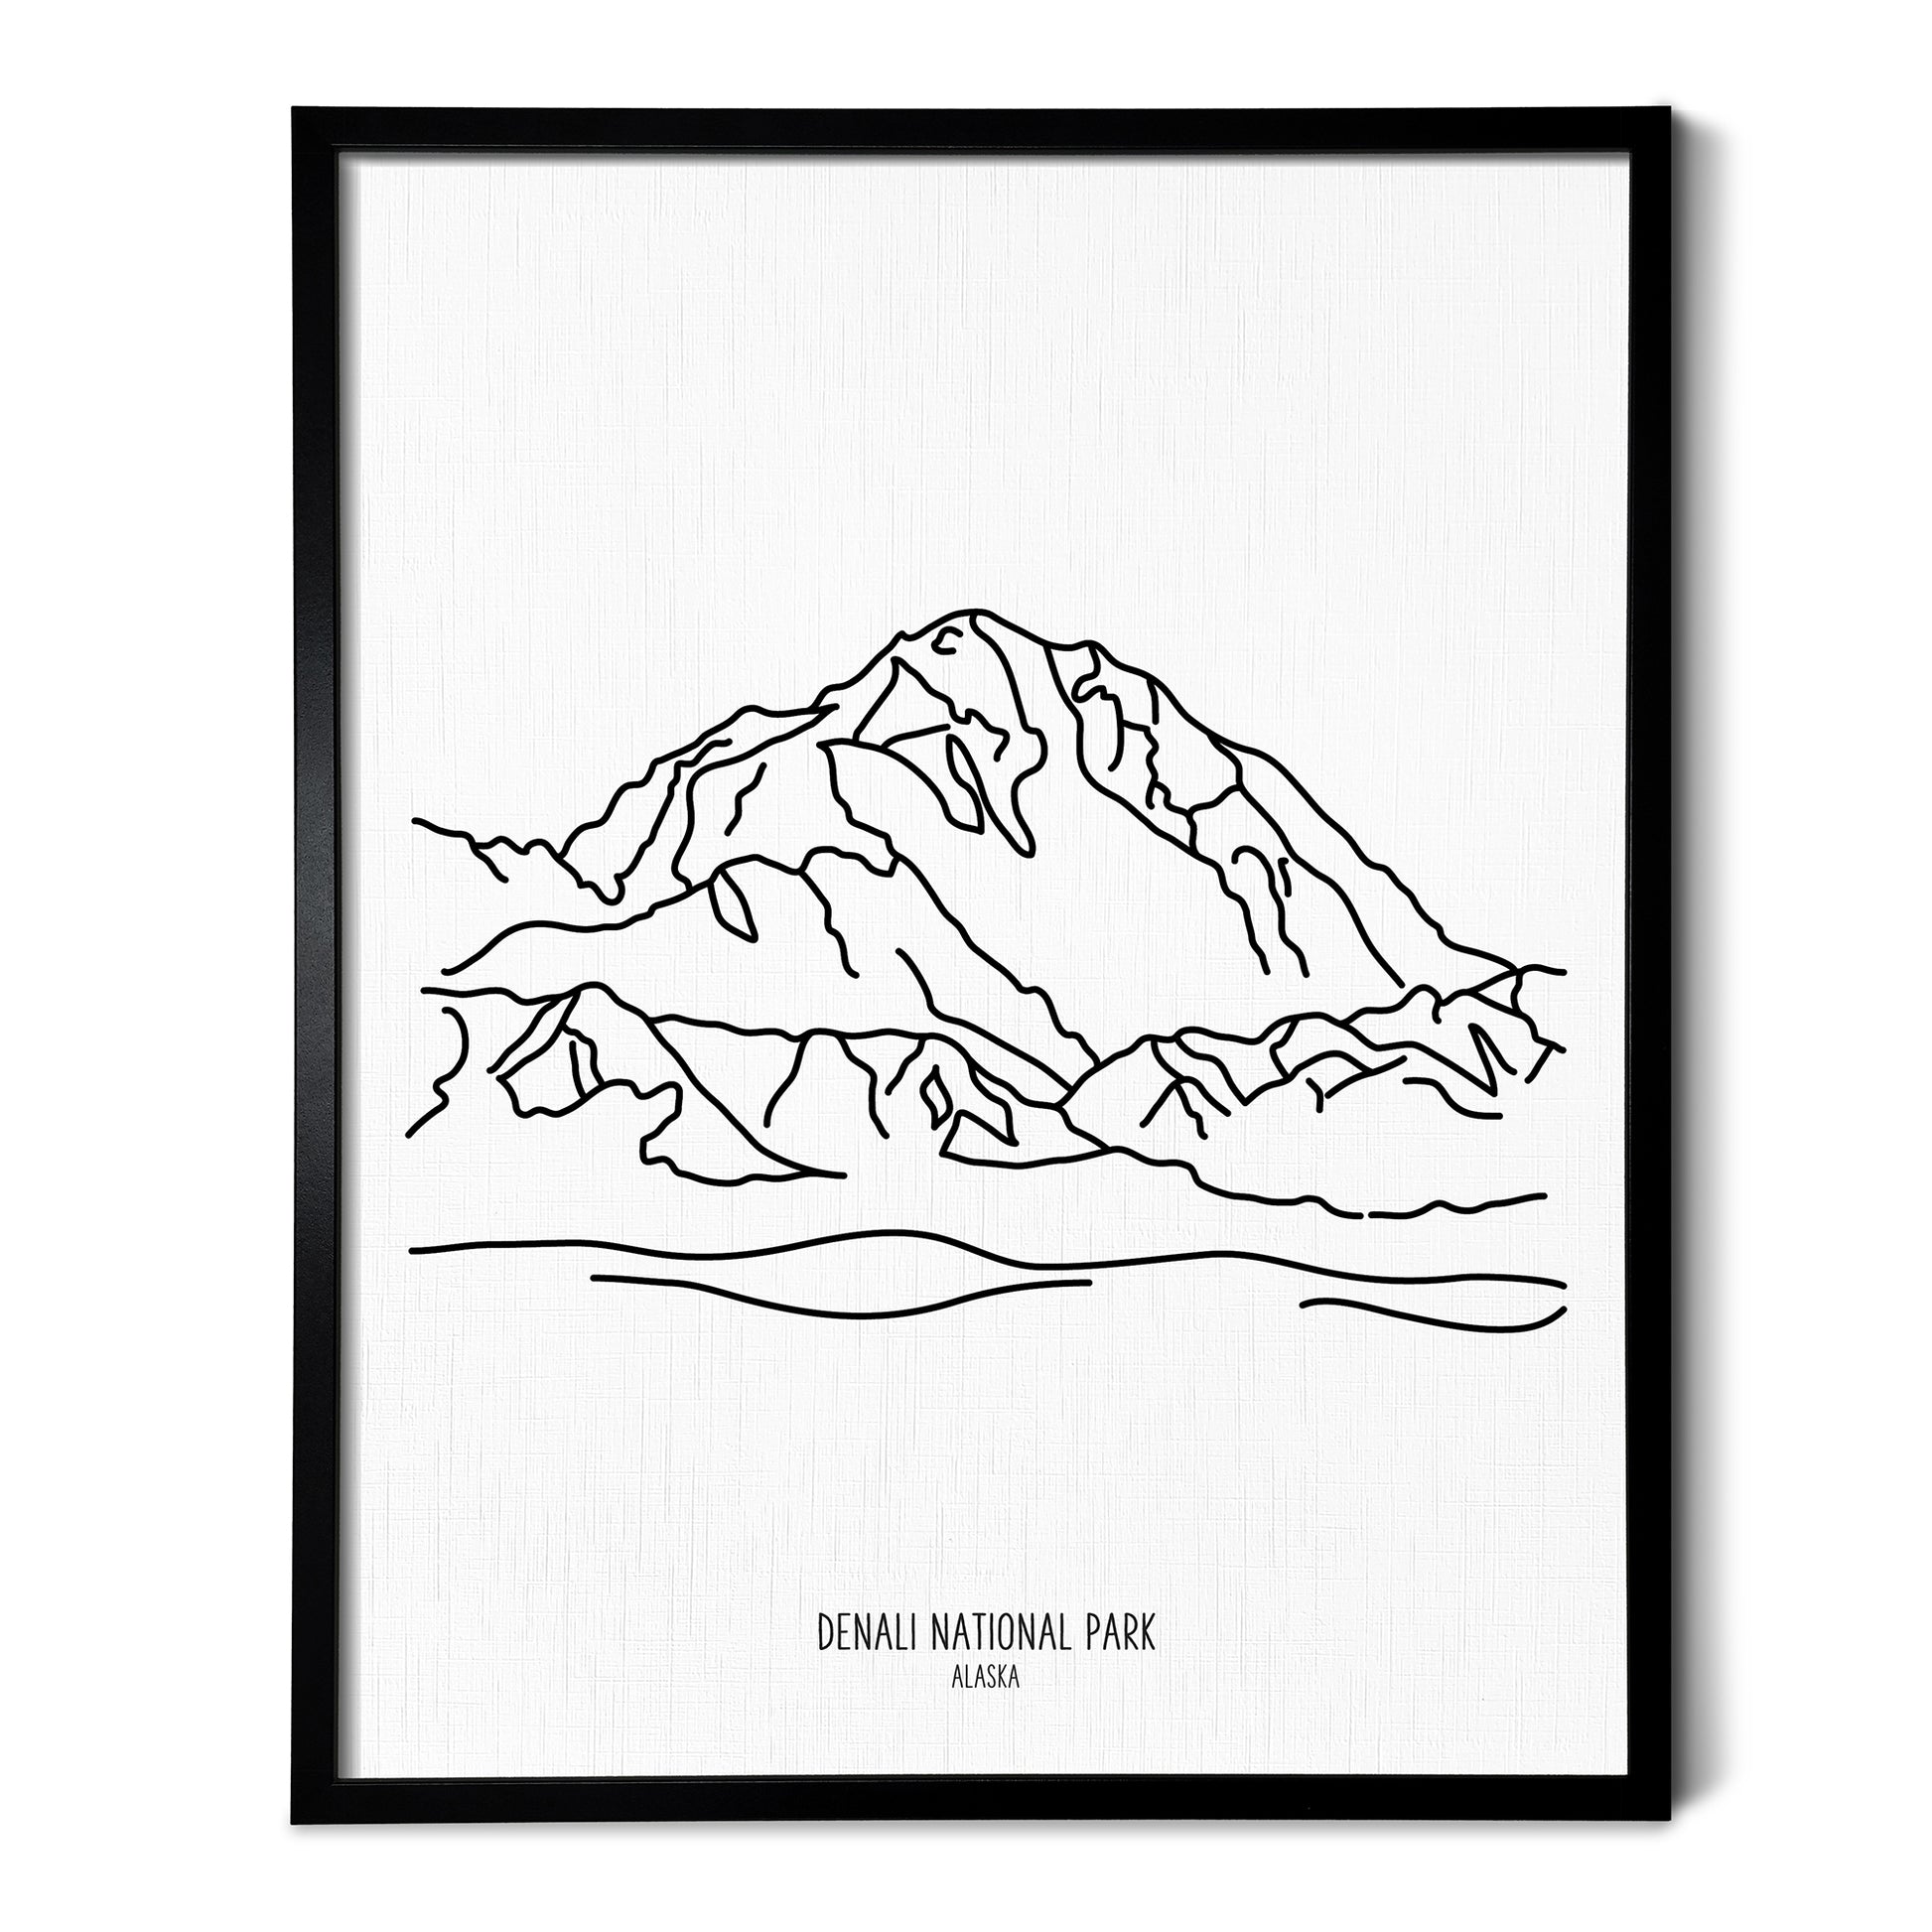 A line art drawing of Denali National Park on white linen paper in a thin black picture frame